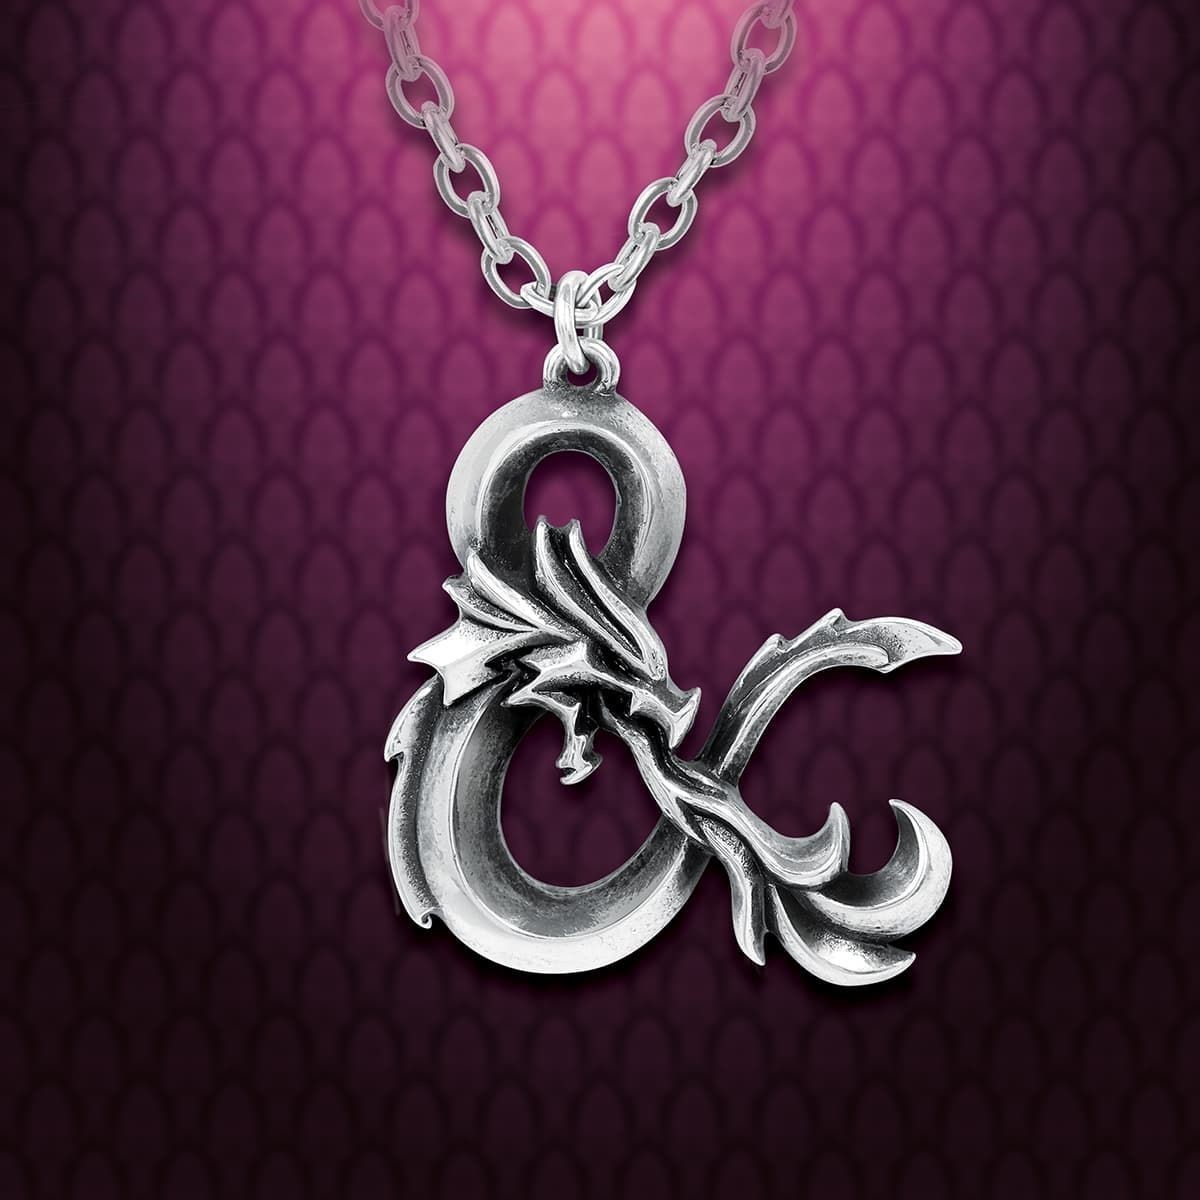 Dungeons & Dragons Pewter Pendant from Alchemy Gothic on Chain